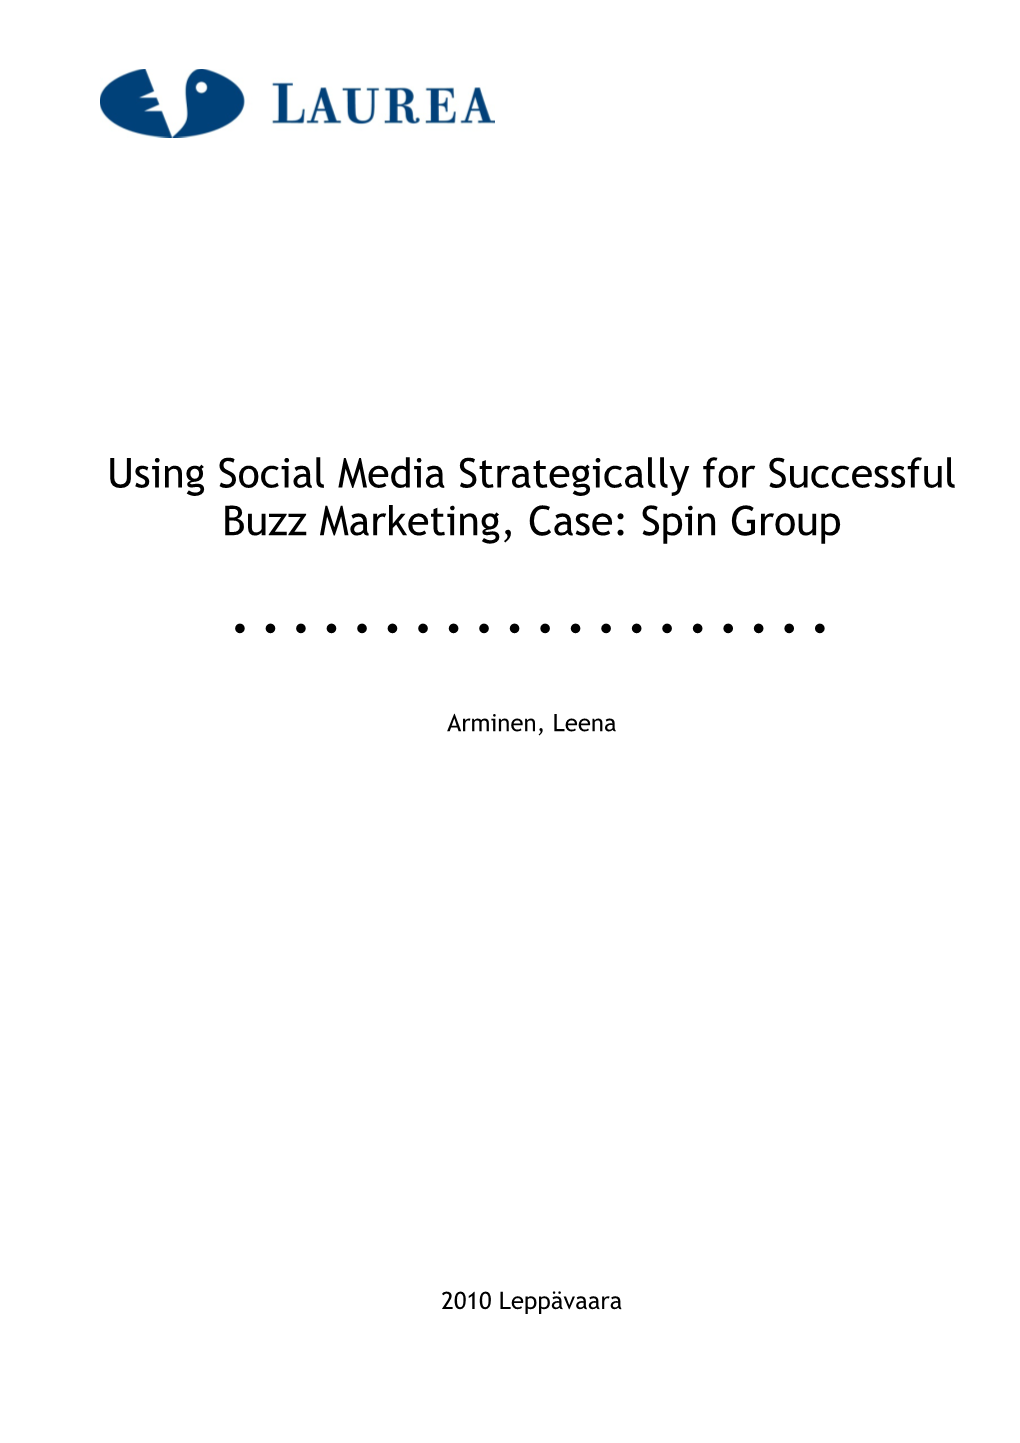 Using Social Media Strategically for Successful Buzz Marketing, Case: Spin Group